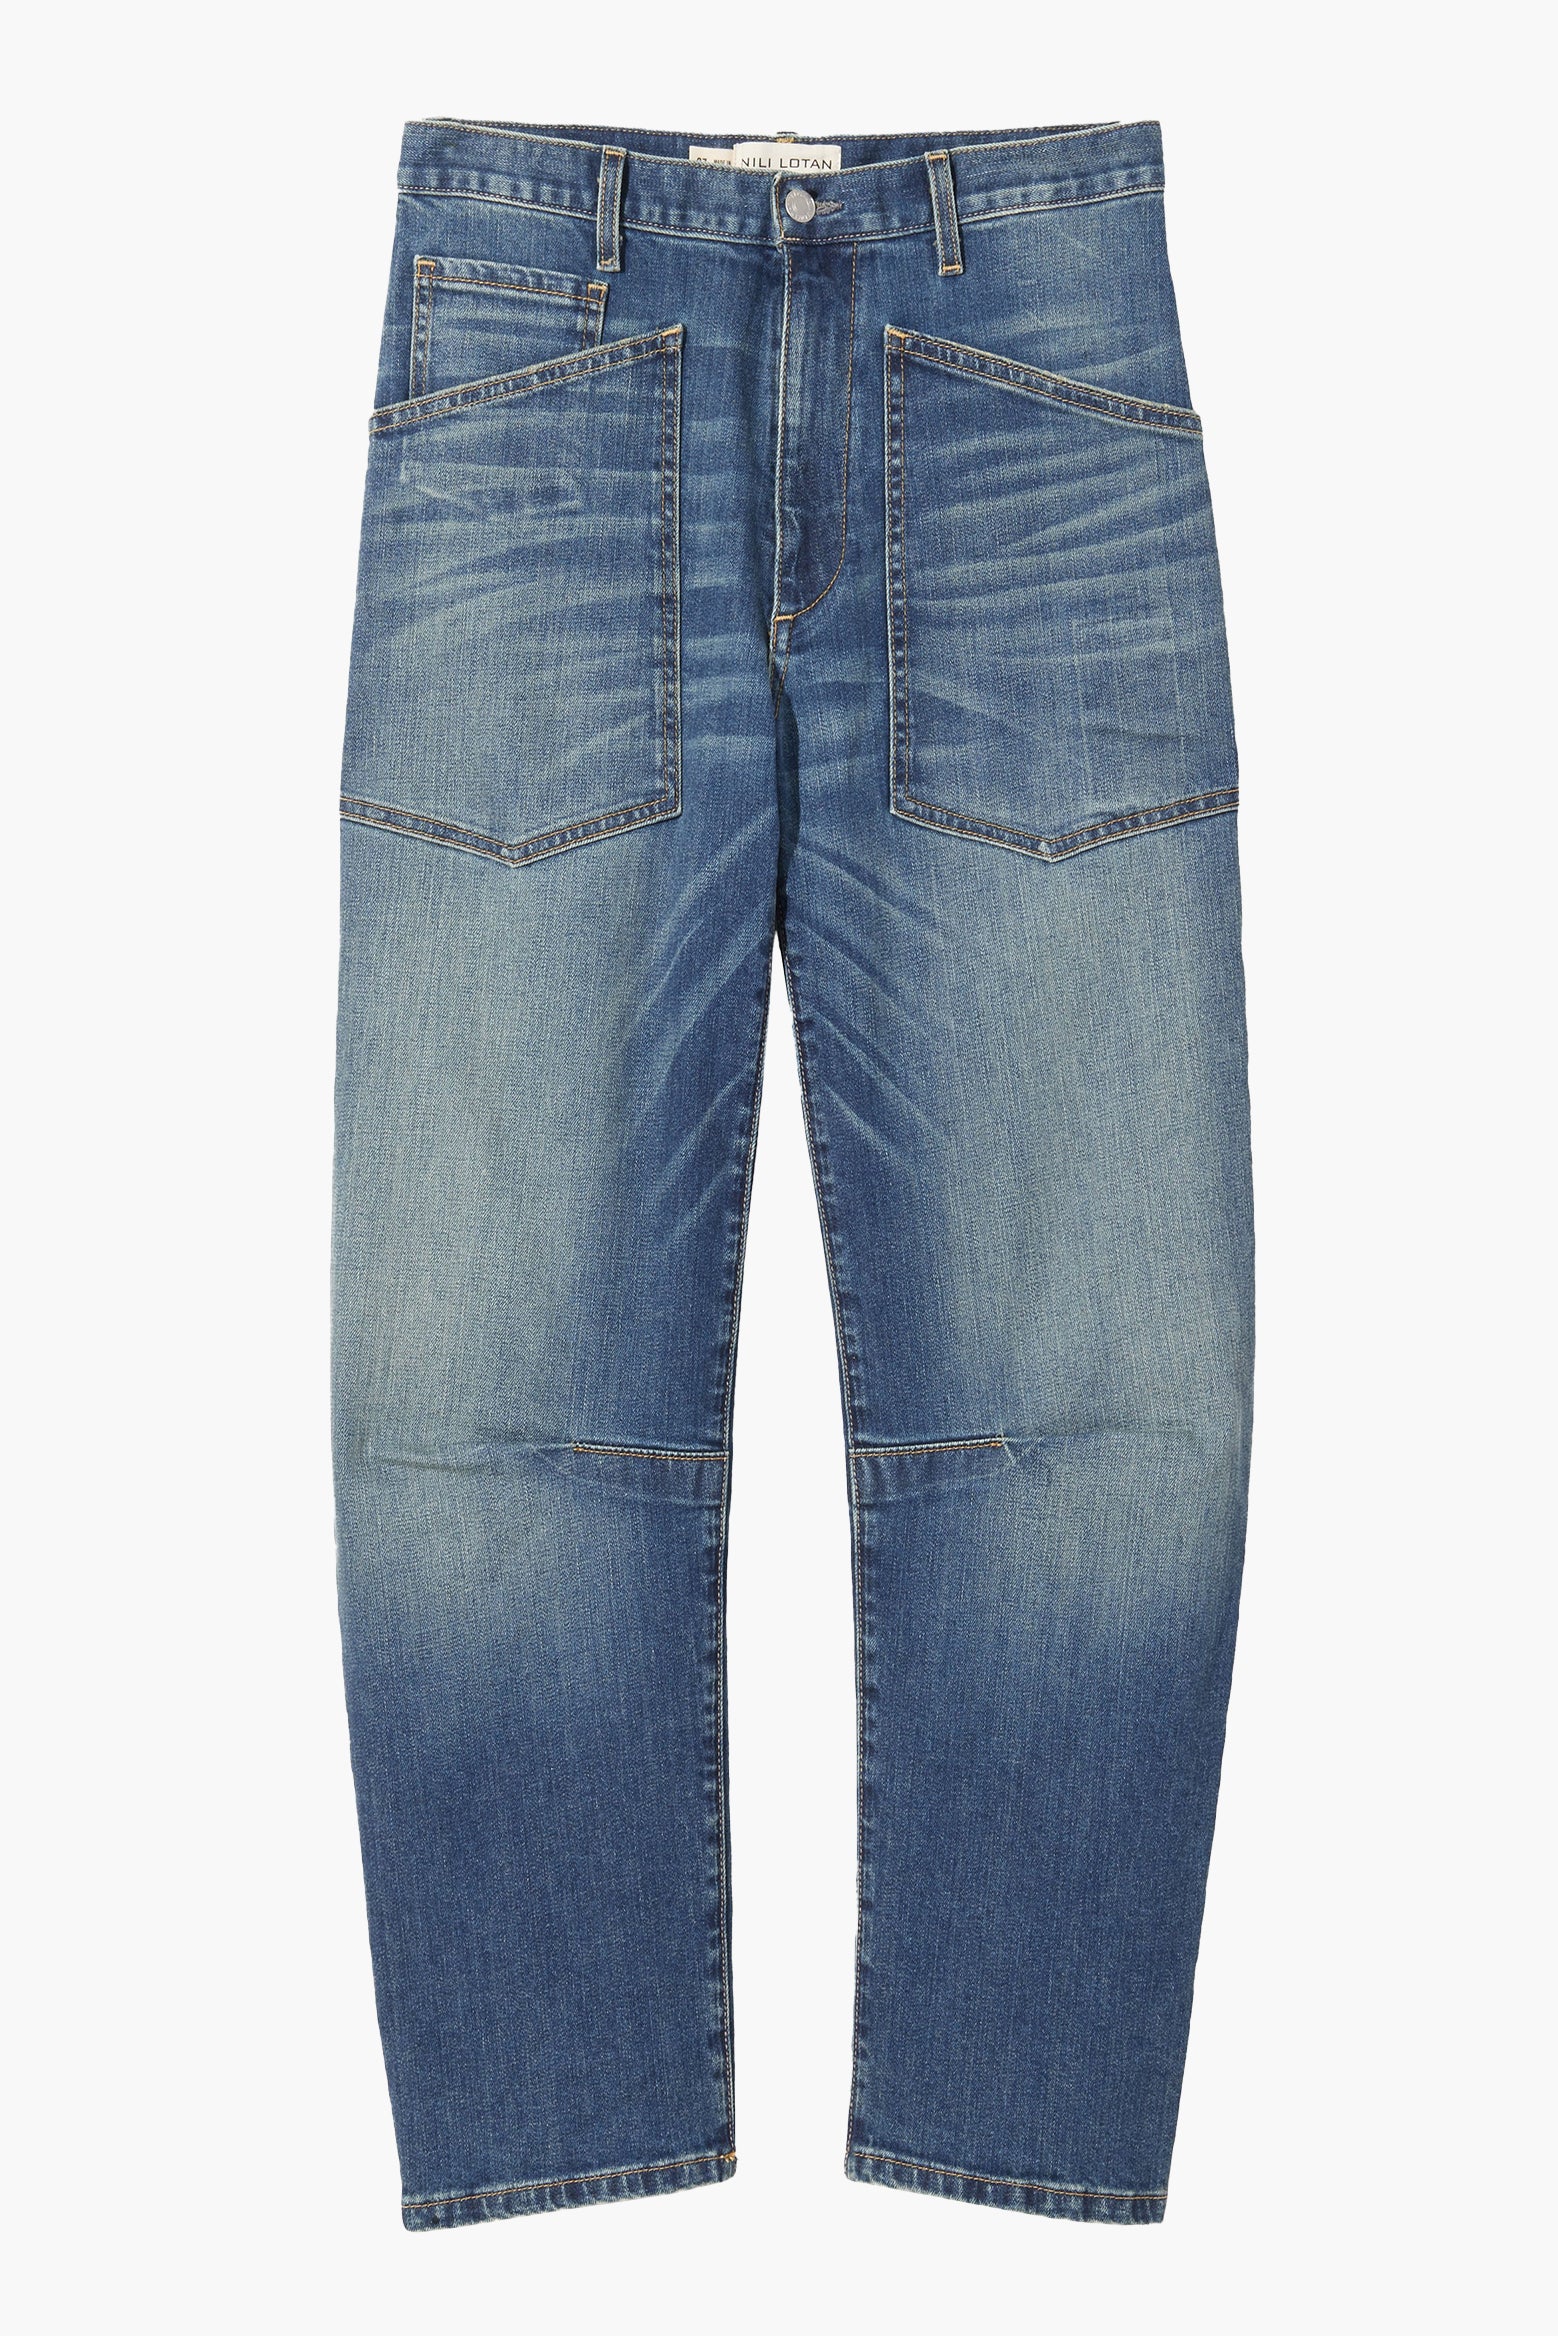 The Nili Lotan Shon Jean in Classic Wash available at The New Trend Australia